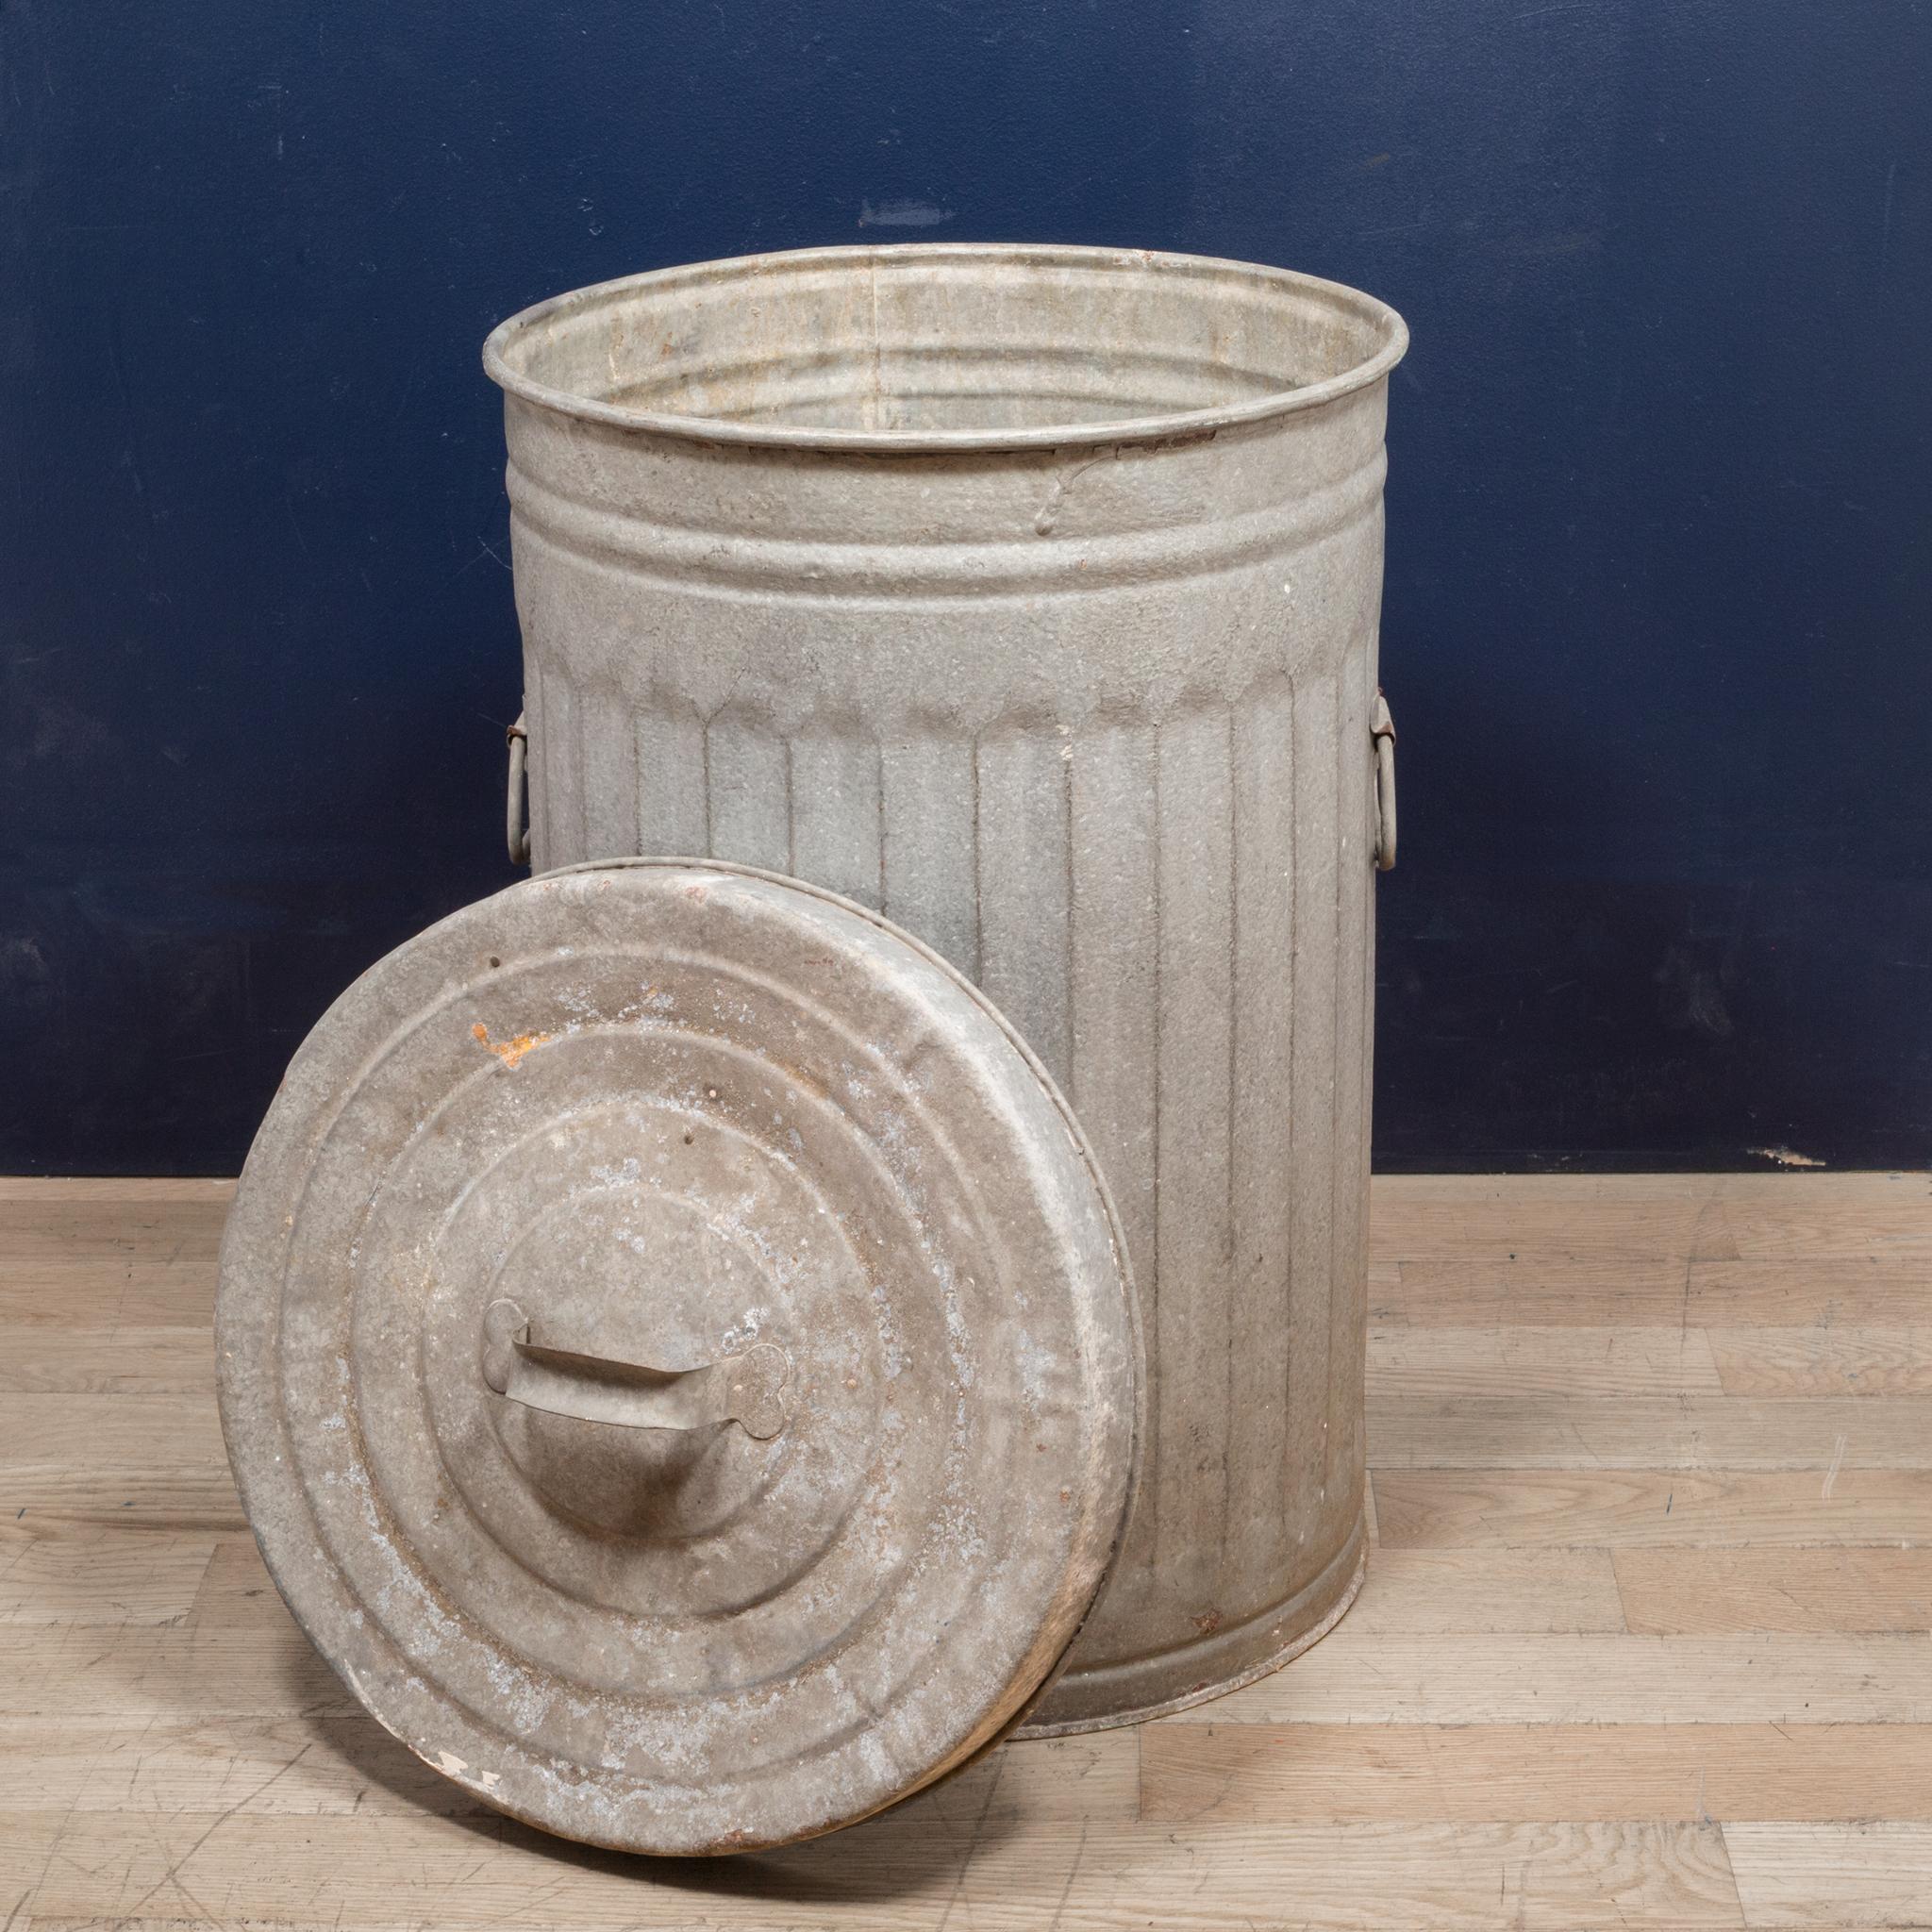 About

All original early 20th century antique American vintage industrial outdoor trash can with original handled lid. The robust waste can is comprised of heavy gauge galvanized steel. It retains the original opposed bent steel drop handles